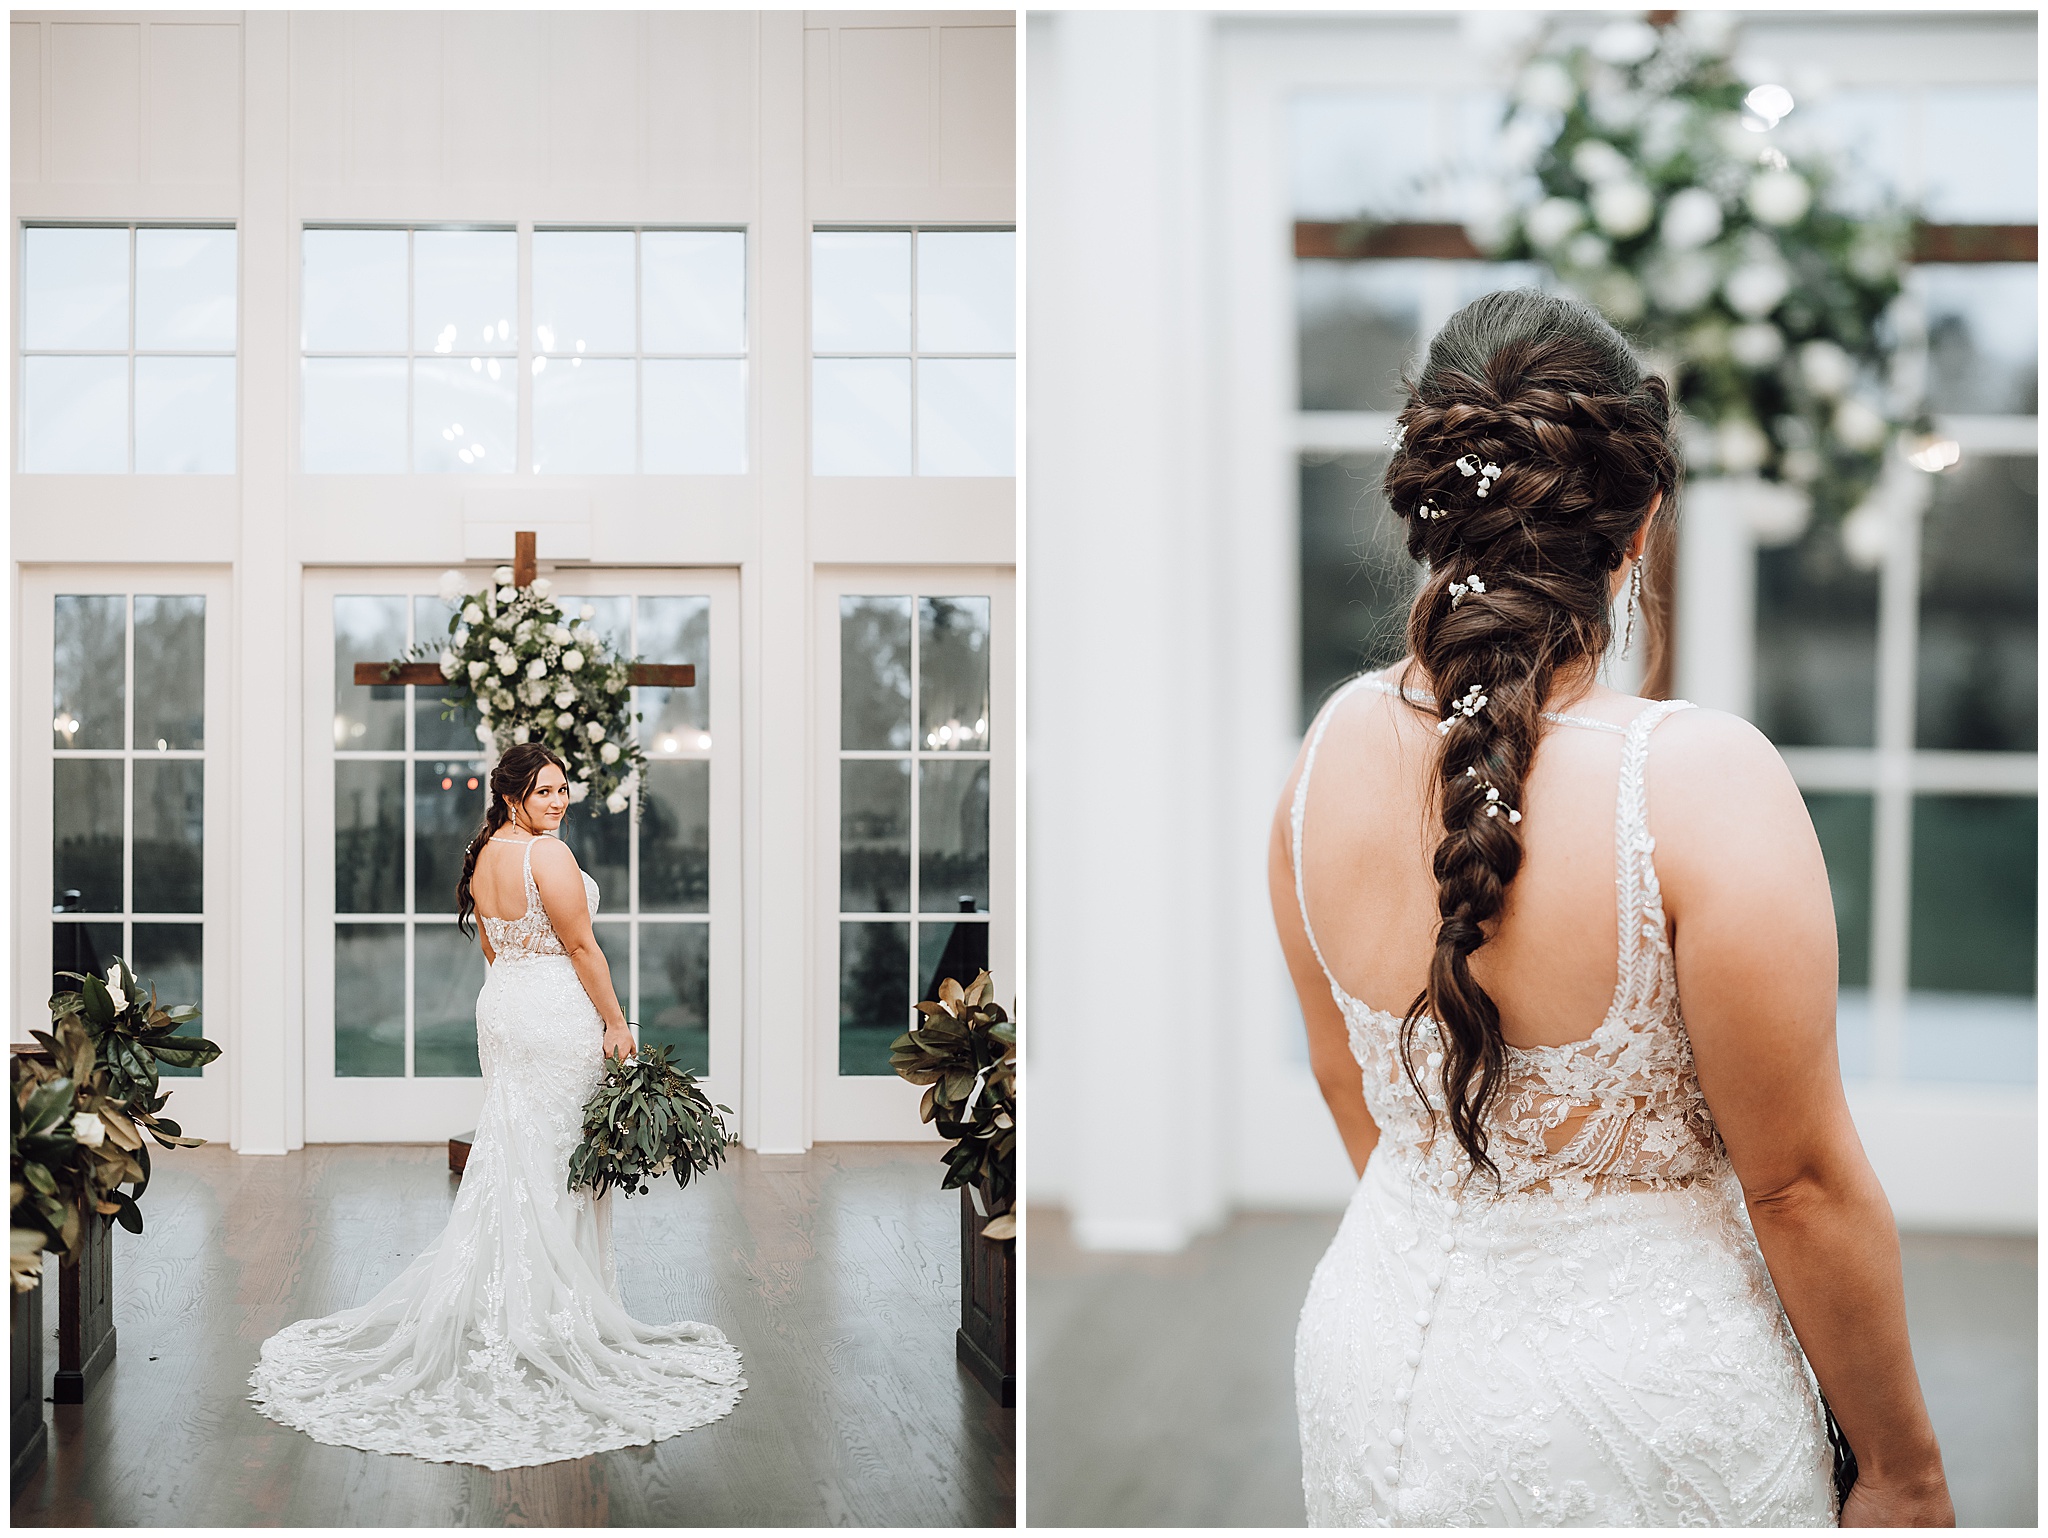 Bride in a white lace dress and train stands in front of a wooden cross covered in white flowers holding her bouquet at The Venue at Birchwood